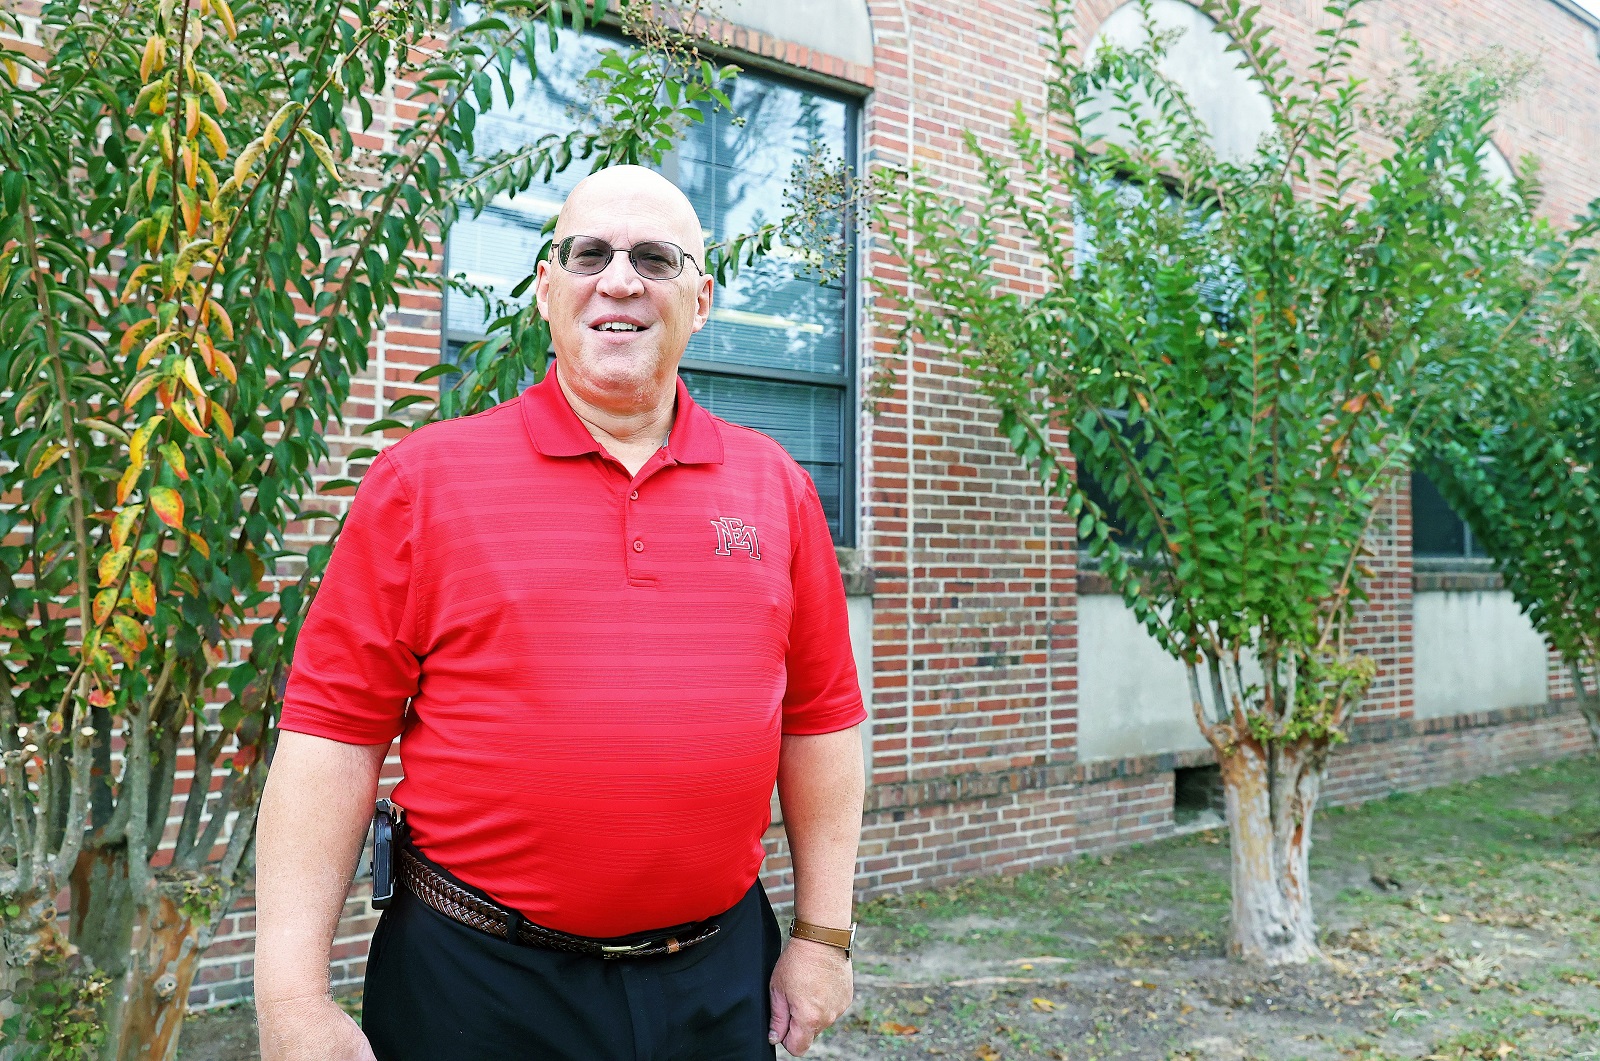 Dr. Jerry Nance began his tenure as the choir director and music instructor for EMCC’s Scooba campus in August and says thus far, it is everything he hoped.